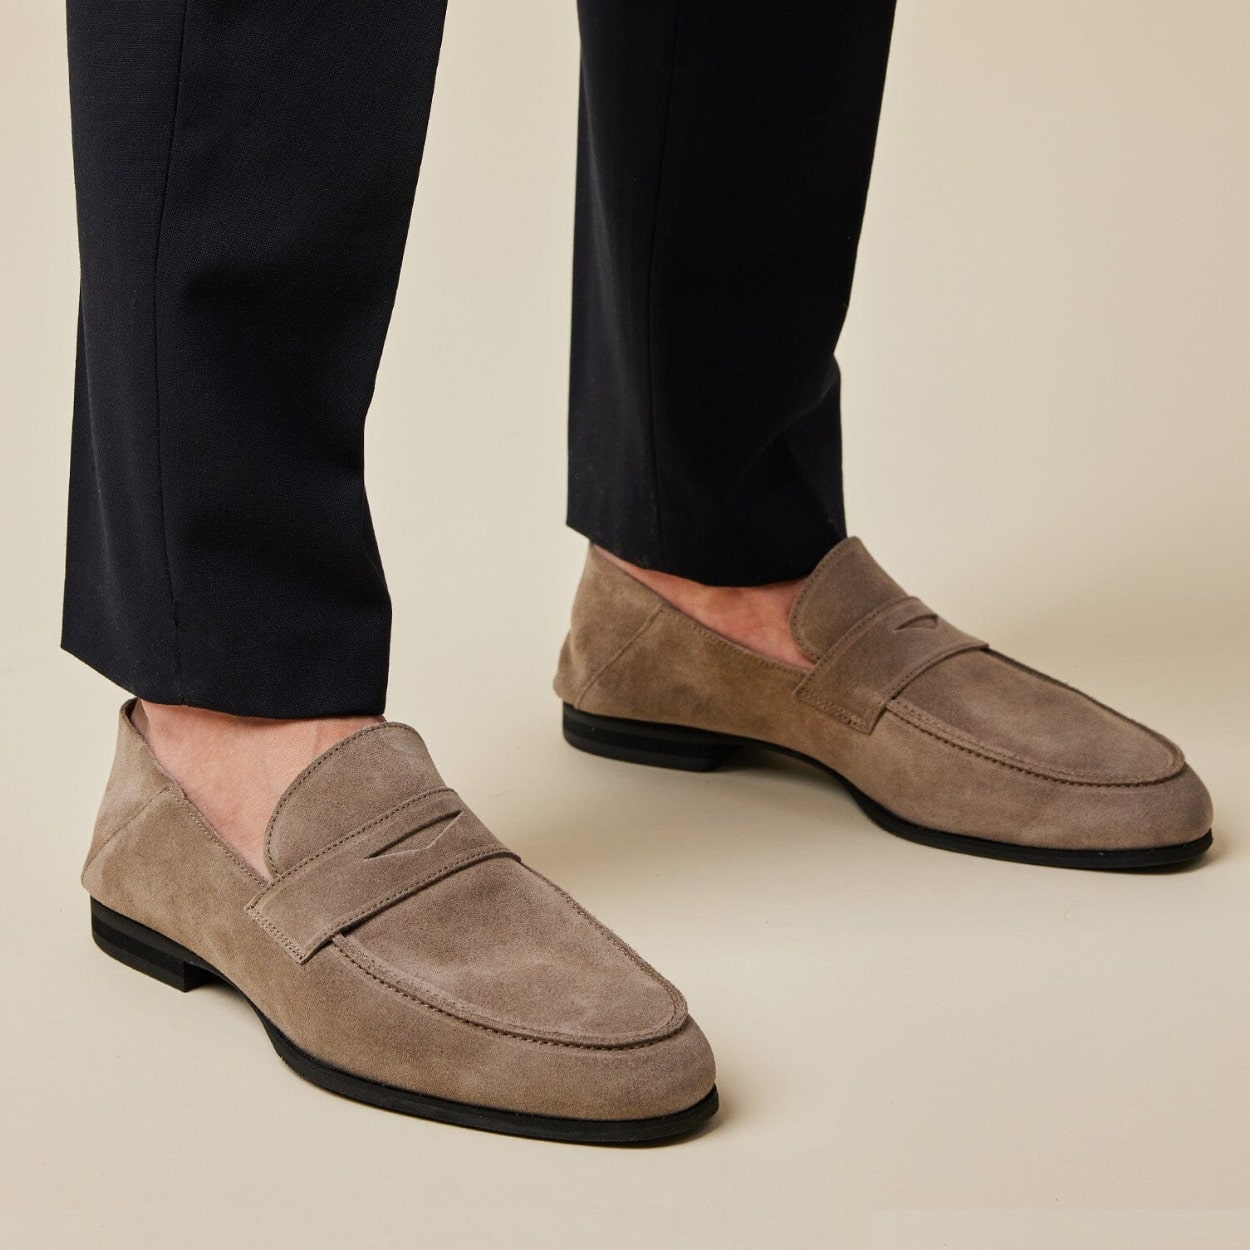 Top 8 Best Business Casual Shoes for Men (2023 Guide) - The Modest Man